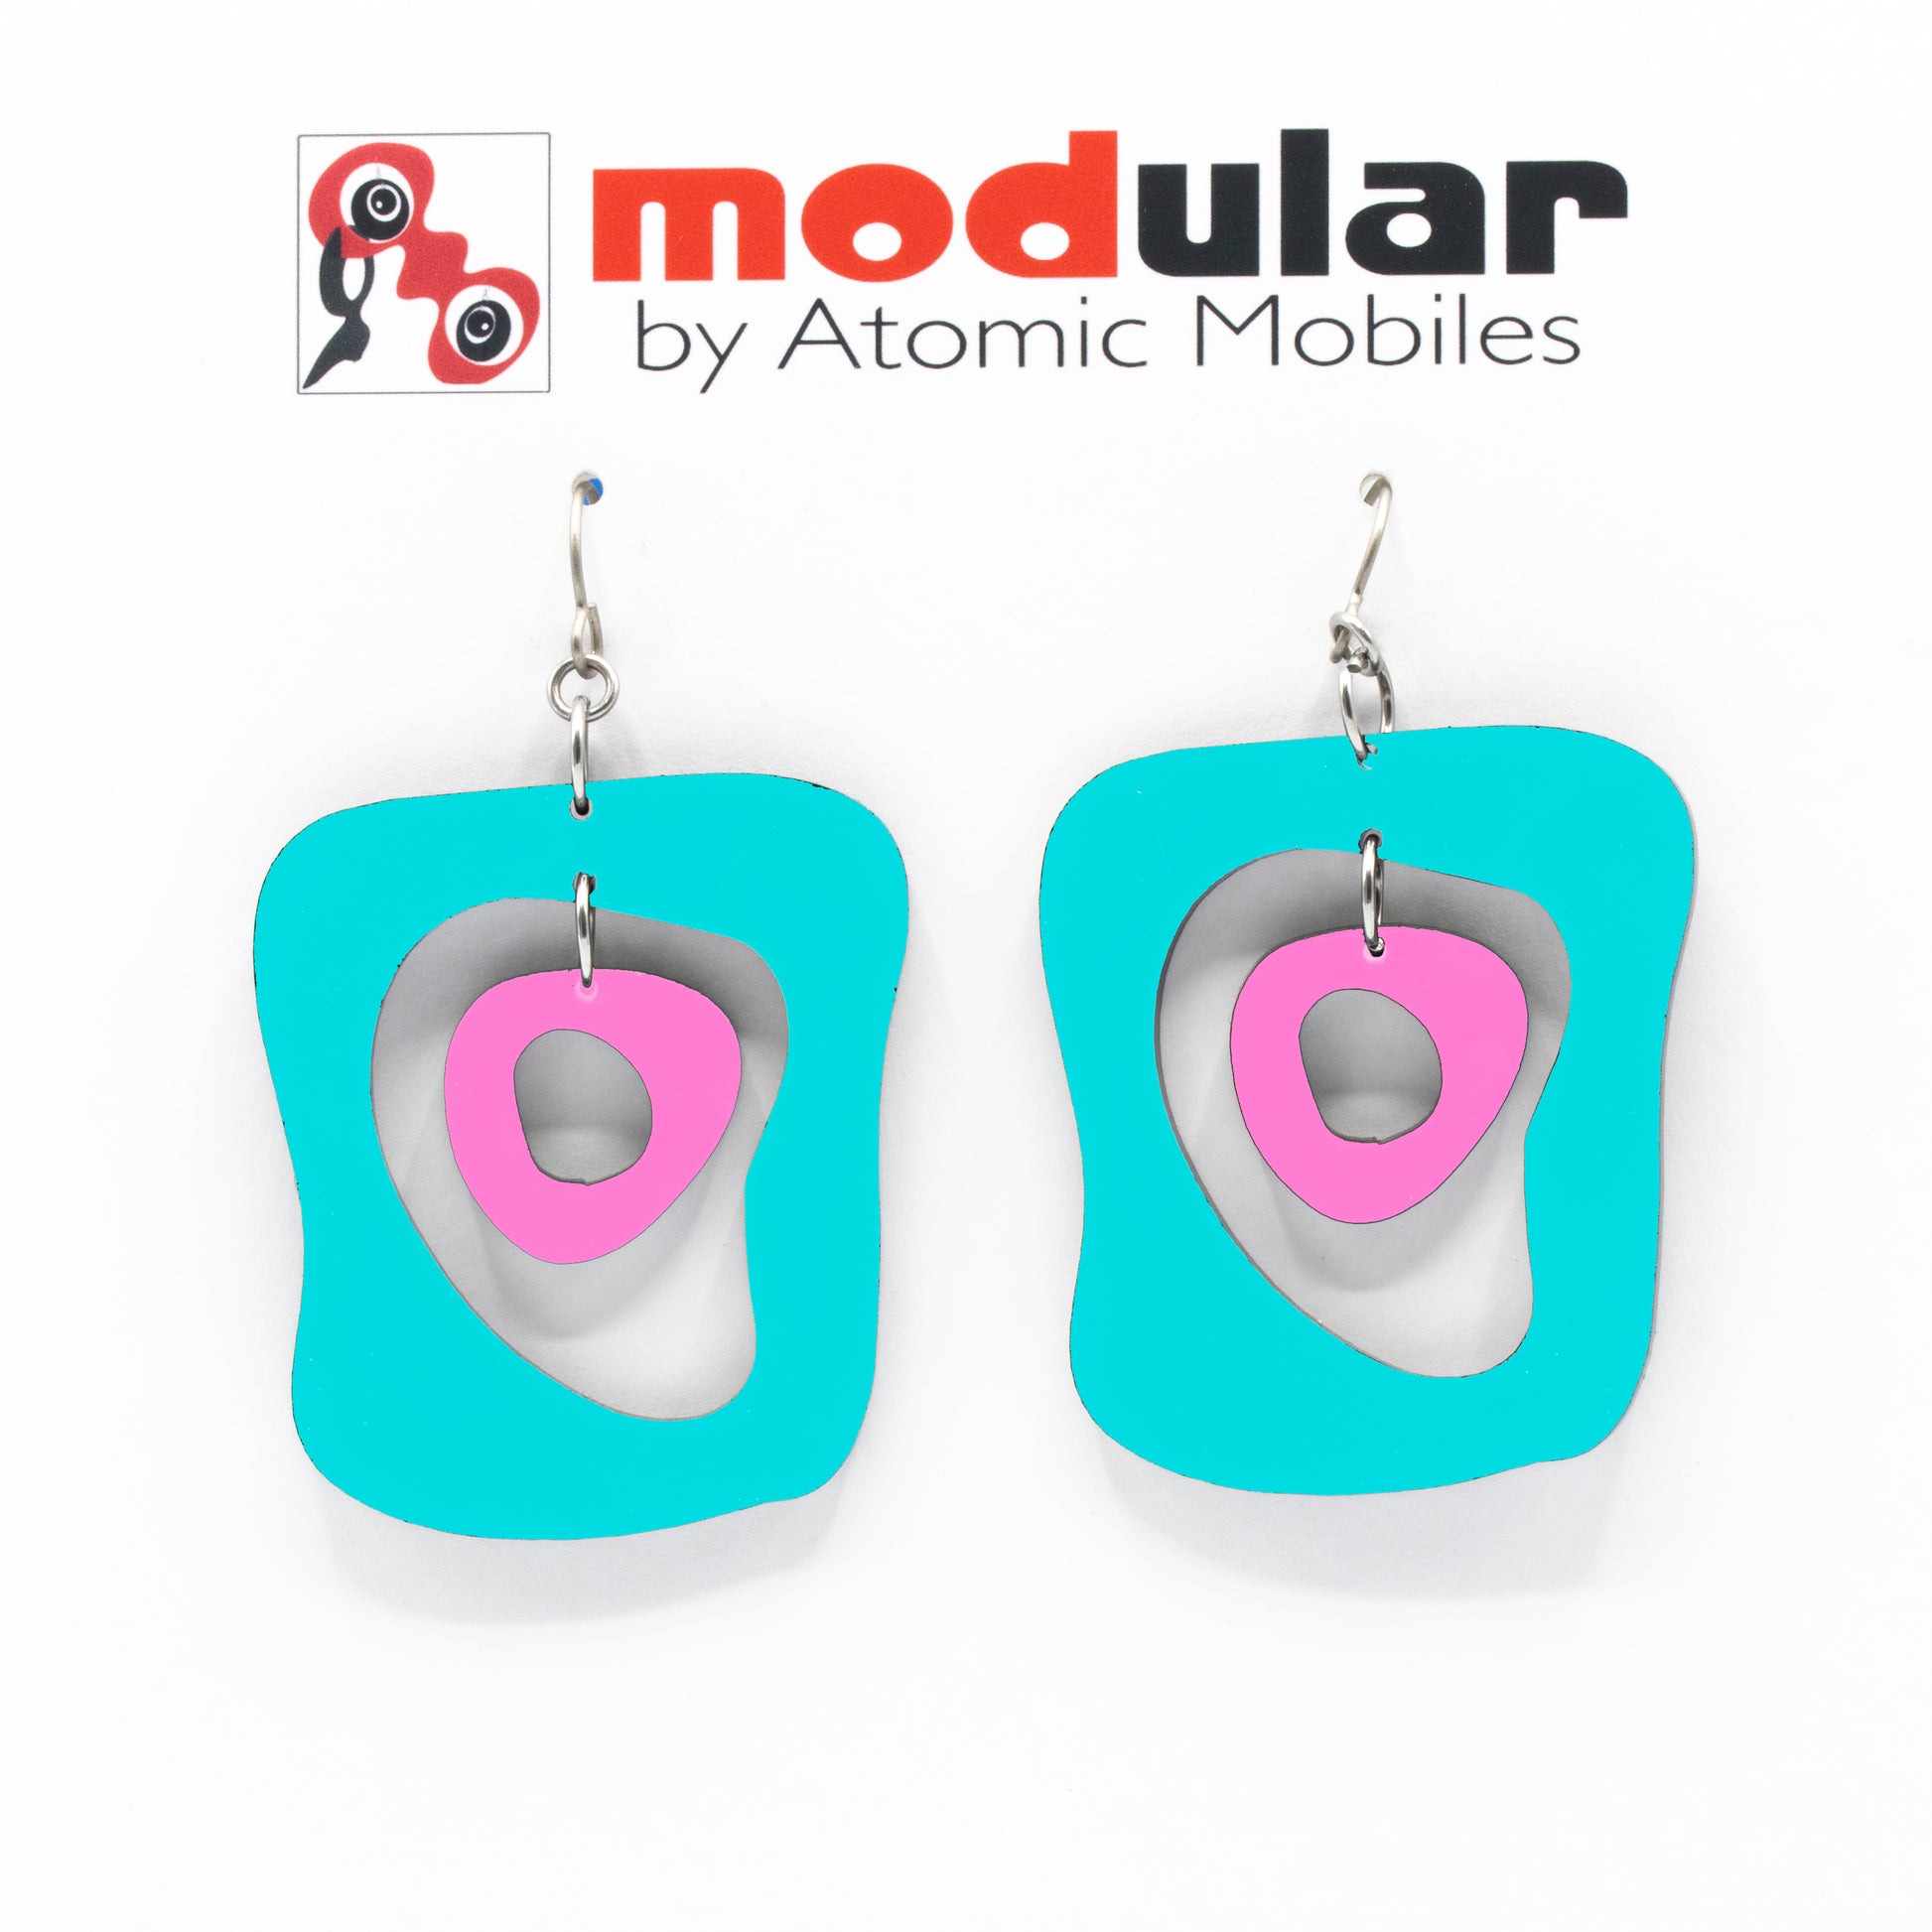 MODular Earrings - Mid Mod Statement Earrings in Aqua and Hot Pink by AtomicMobiles.com - mid century inspired modern art dangle earrings